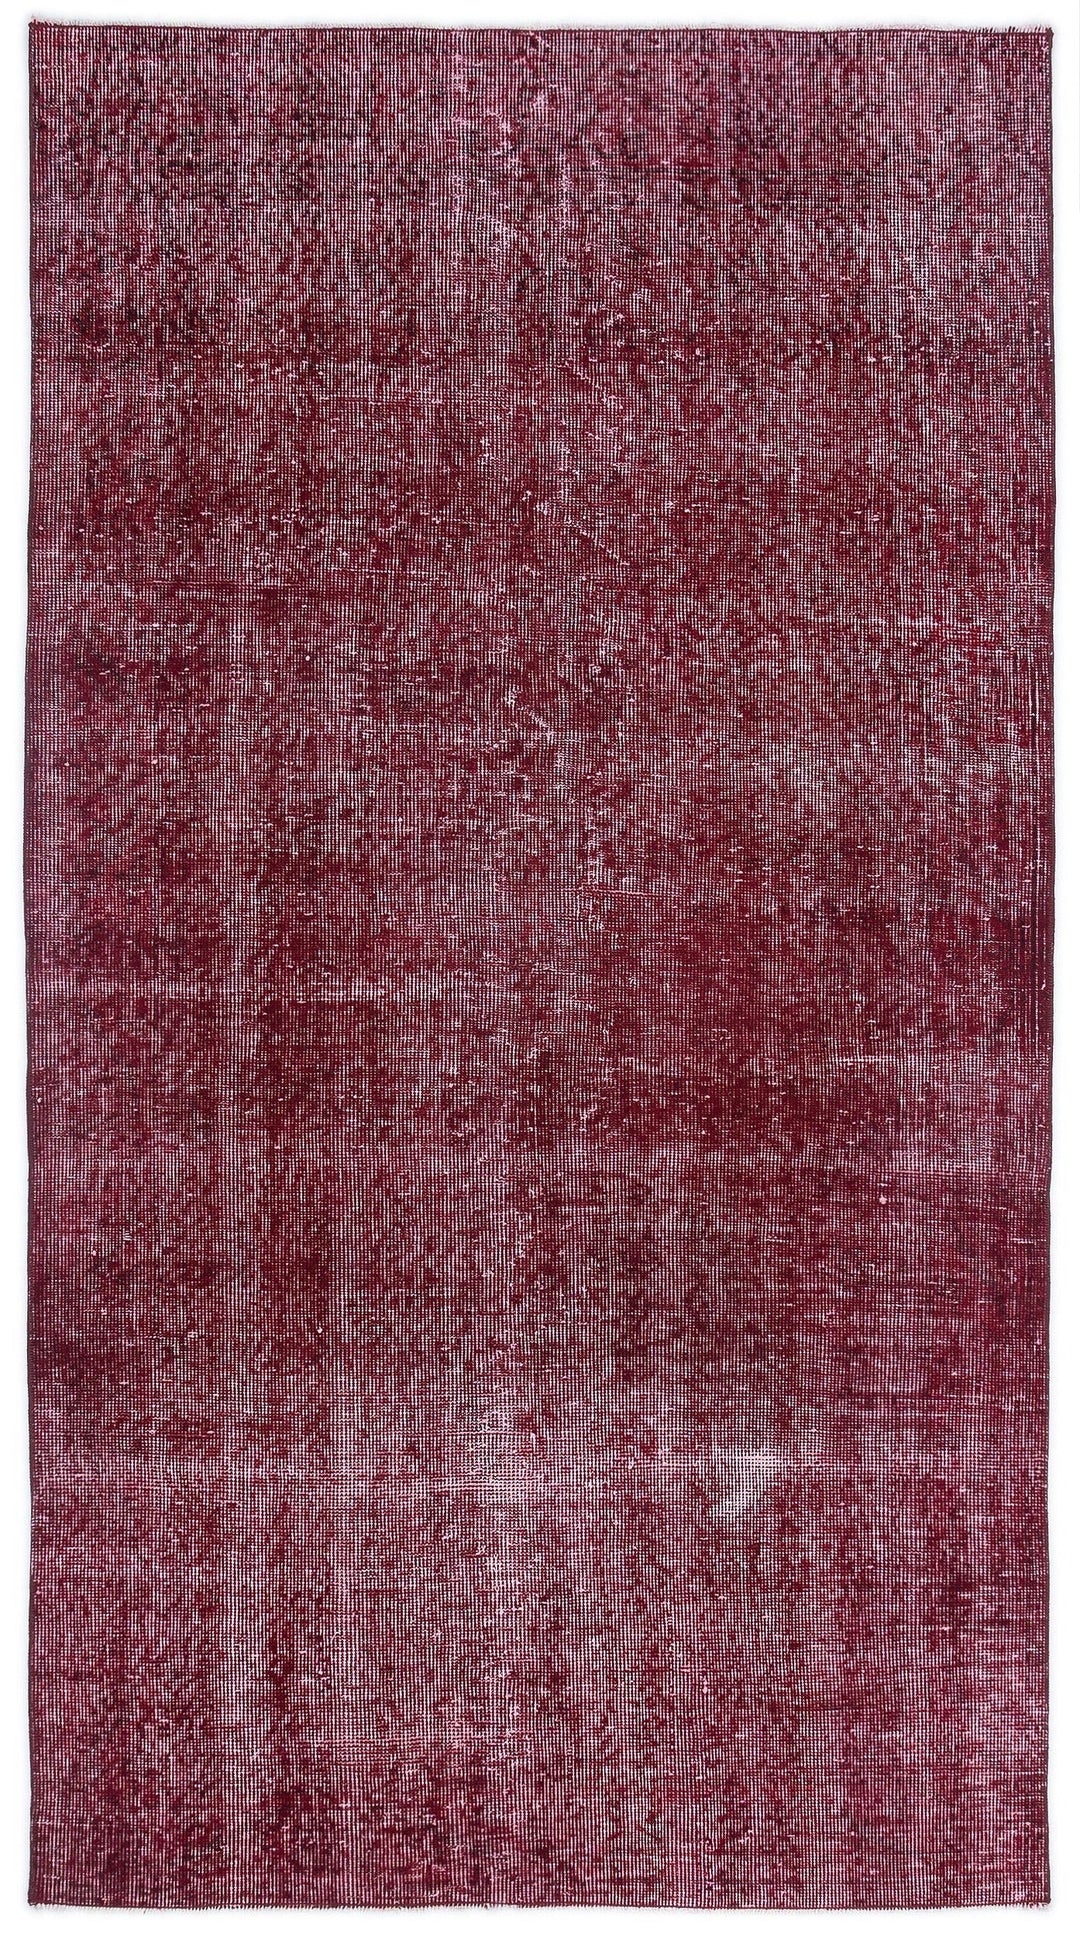 Athens Red Tumbled Wool Hand Woven Carpet 112 x 210